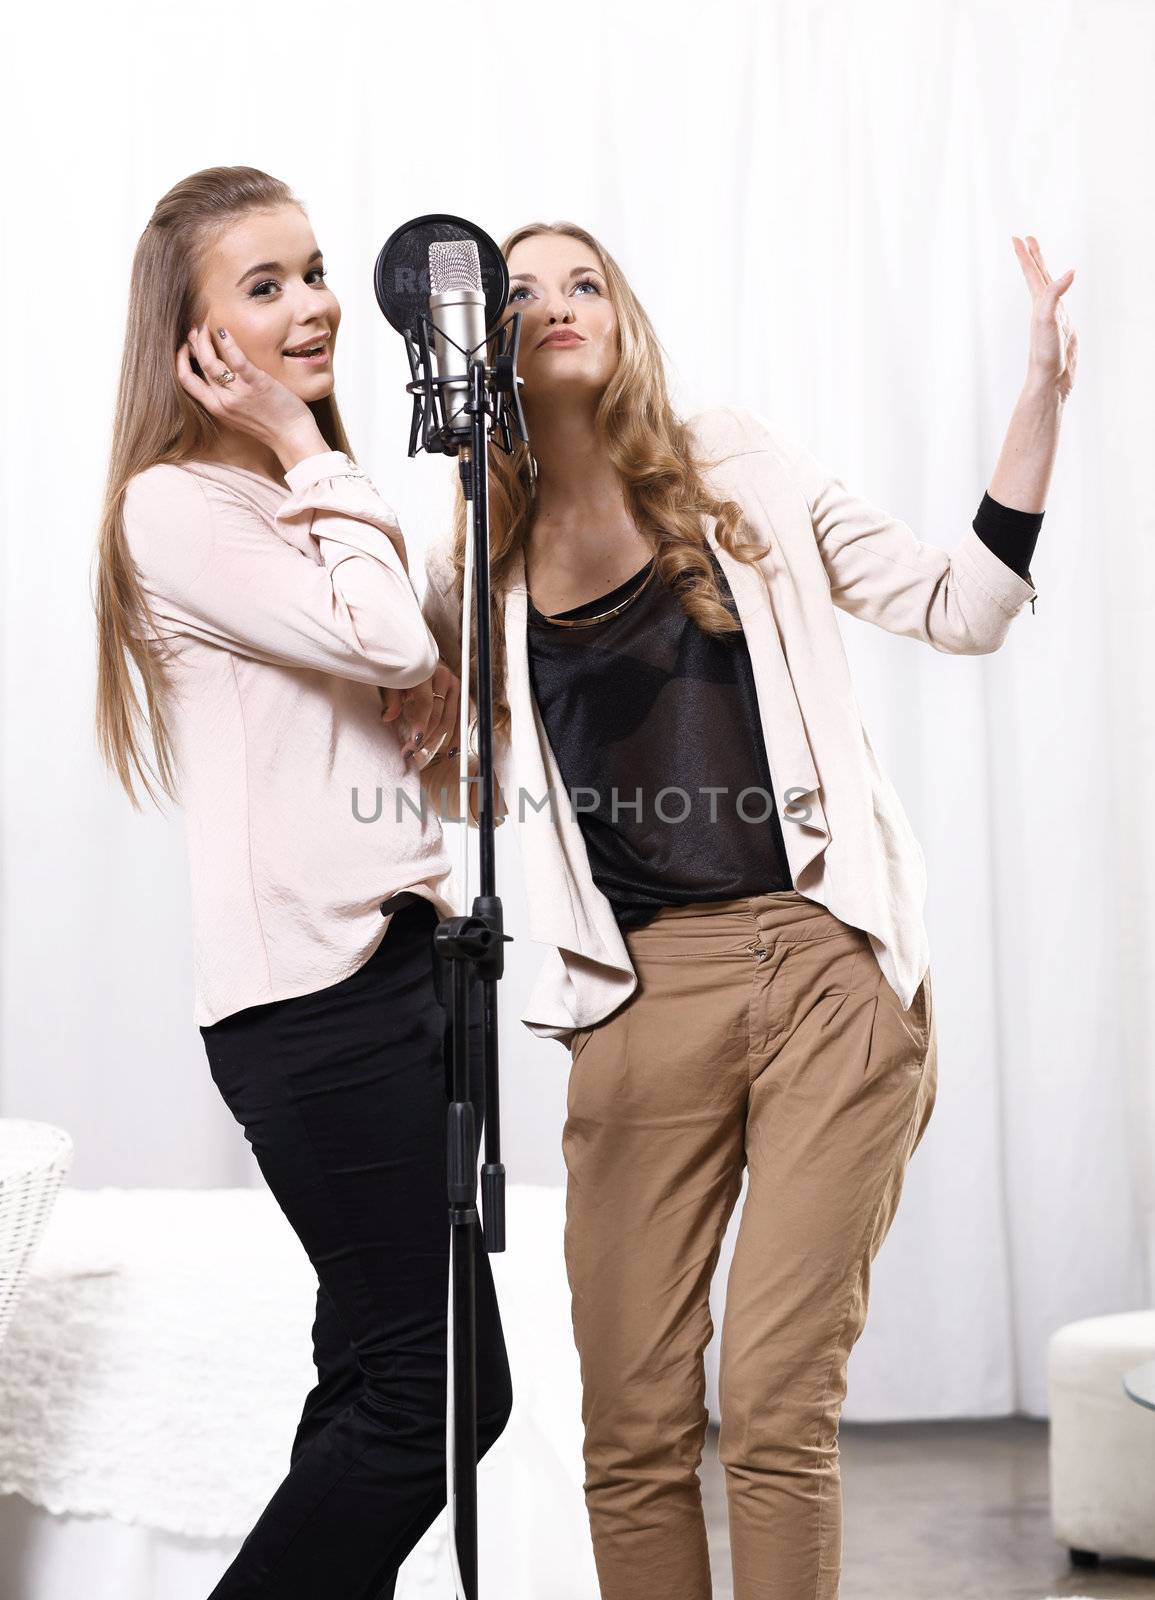 Two girls singing around the microphone in the studio by robert_przybysz